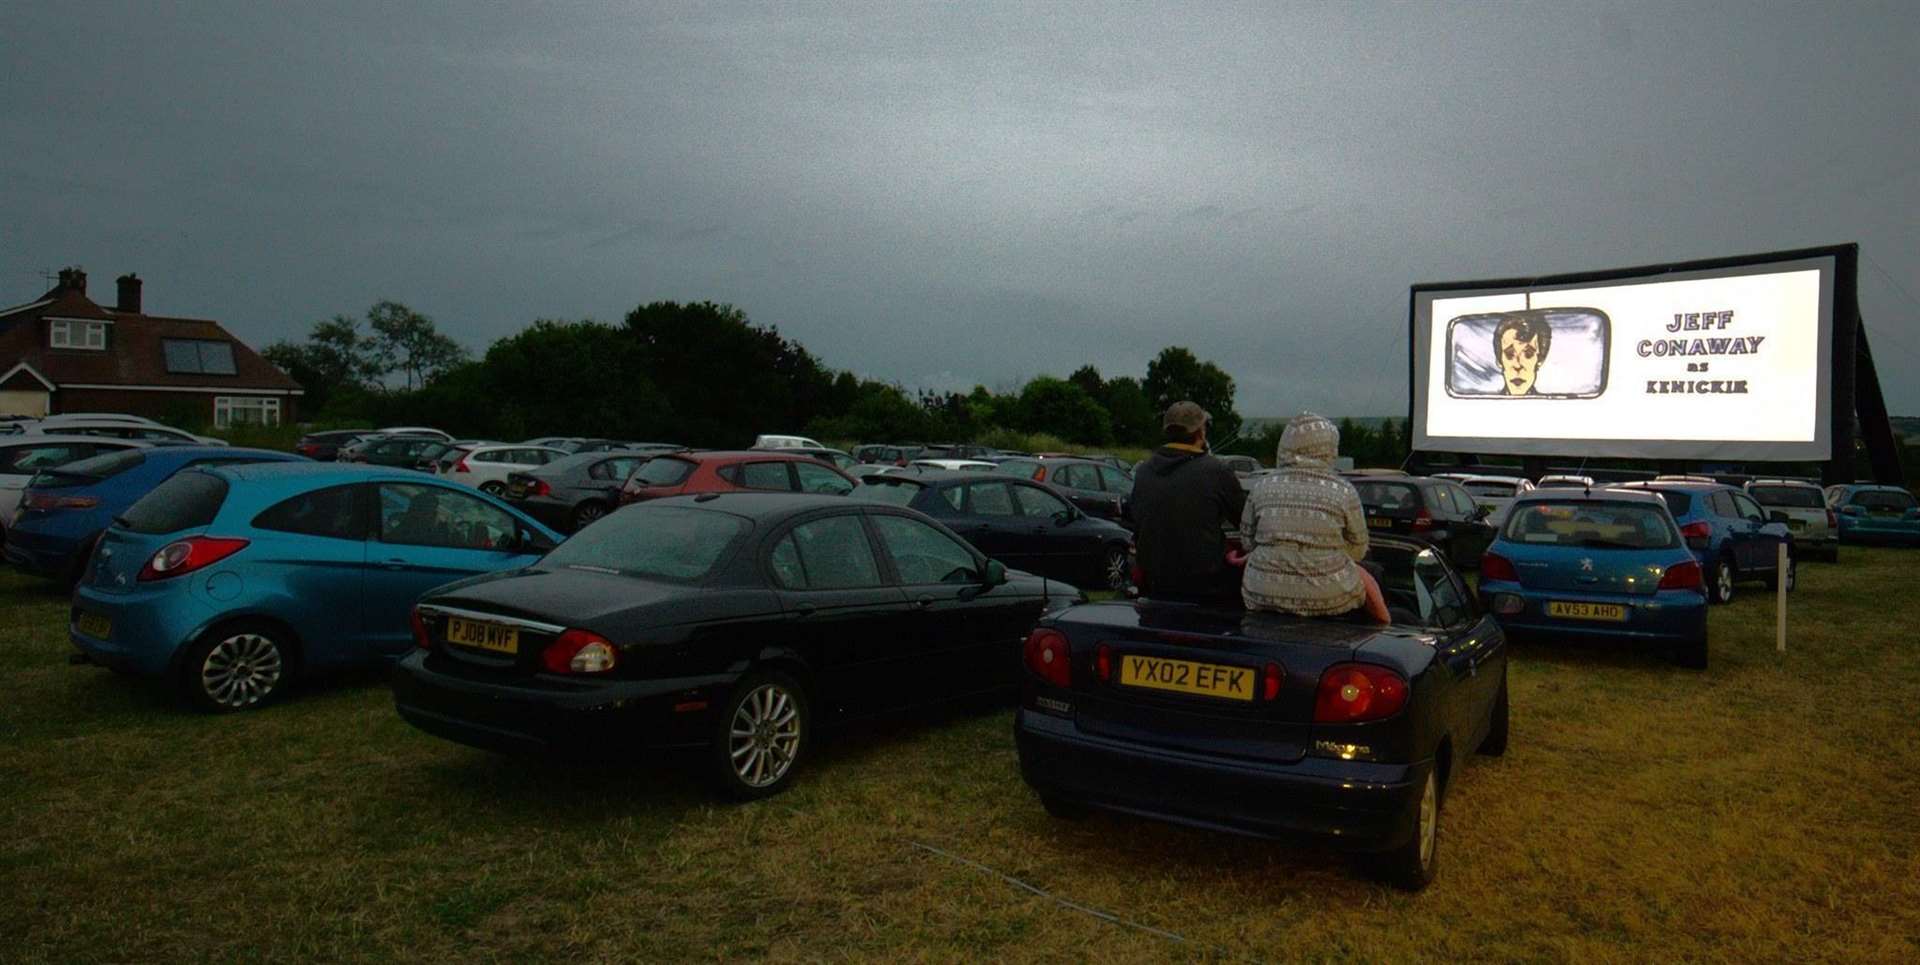 The Moonlight Drive-In Cinema has been cancelled up and down the country